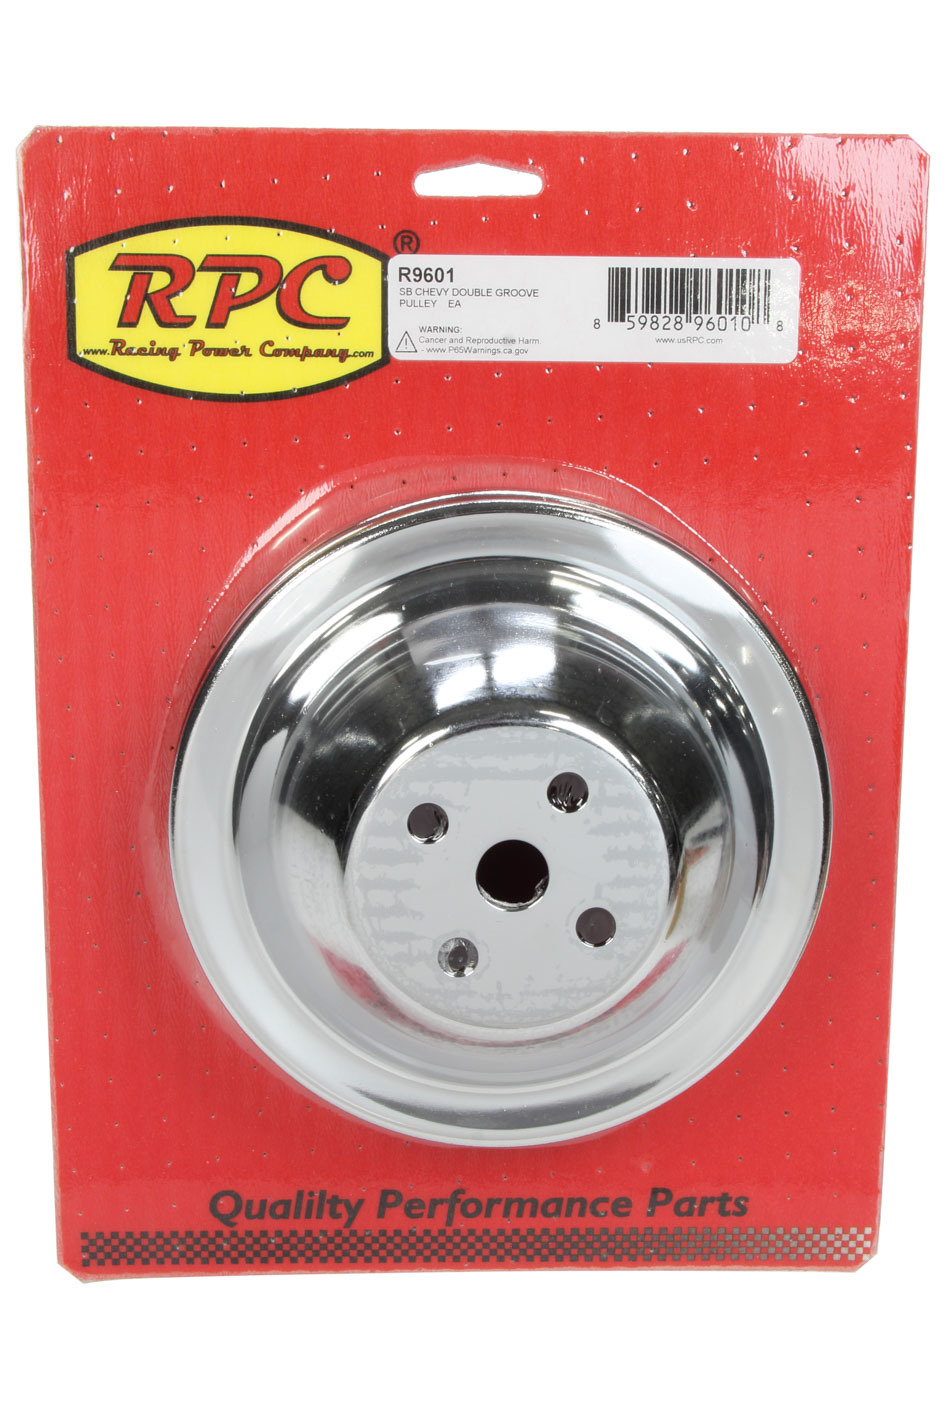 Racing Power Company R9601 Water Pump Pulley, V-Belt, 2 Groove, 6.400 in Diameter, Steel, Chrome, Short Water Pump, Small Block Chevy, Each